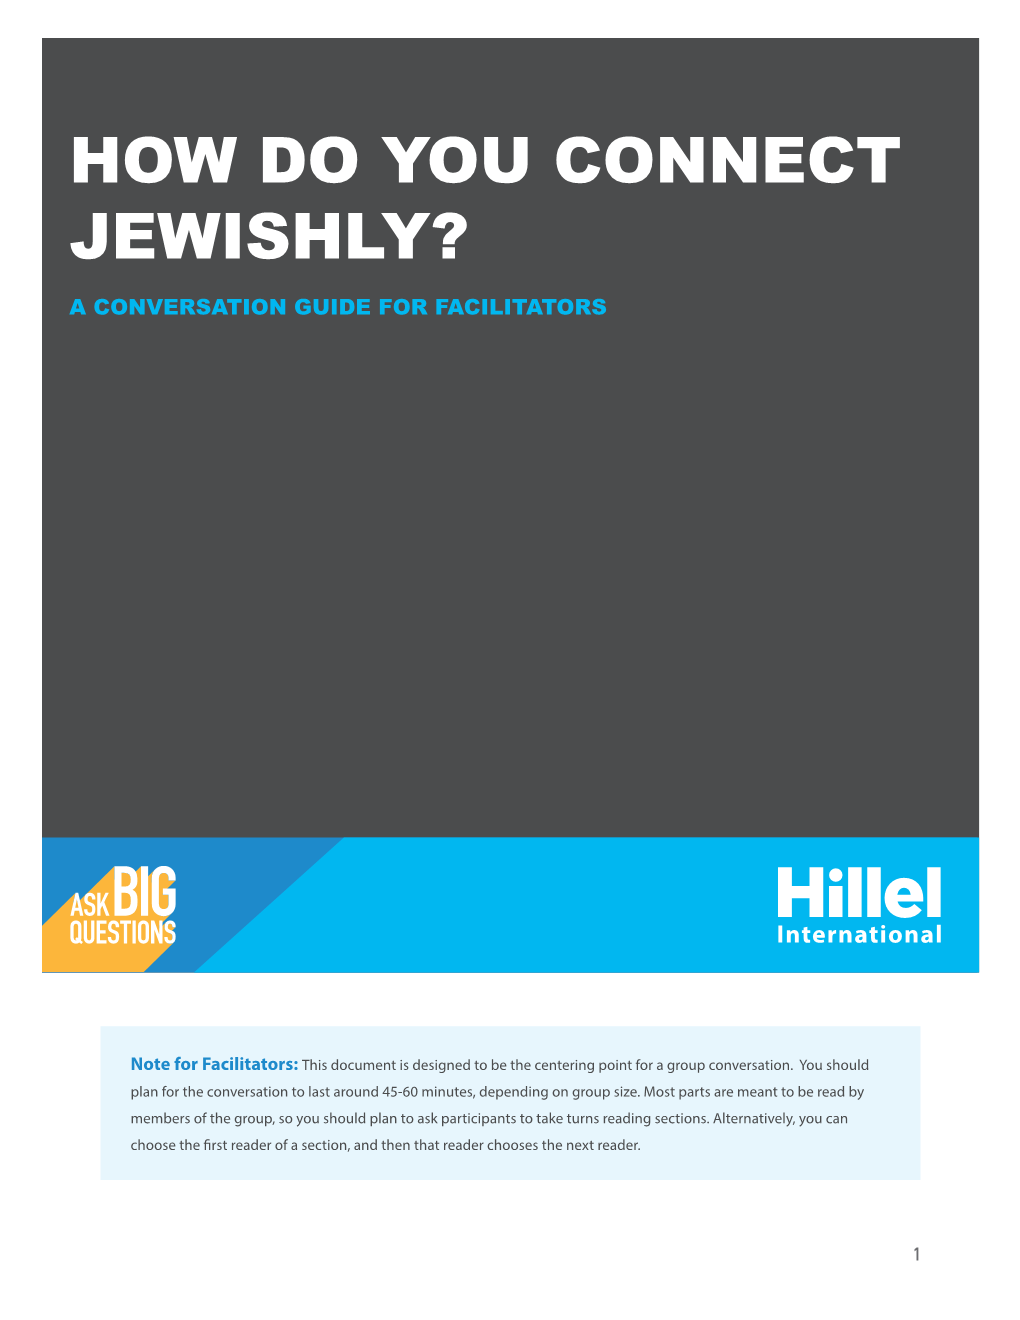 How Do You Connect Jewishly? a Conversation Guide for Facilitators